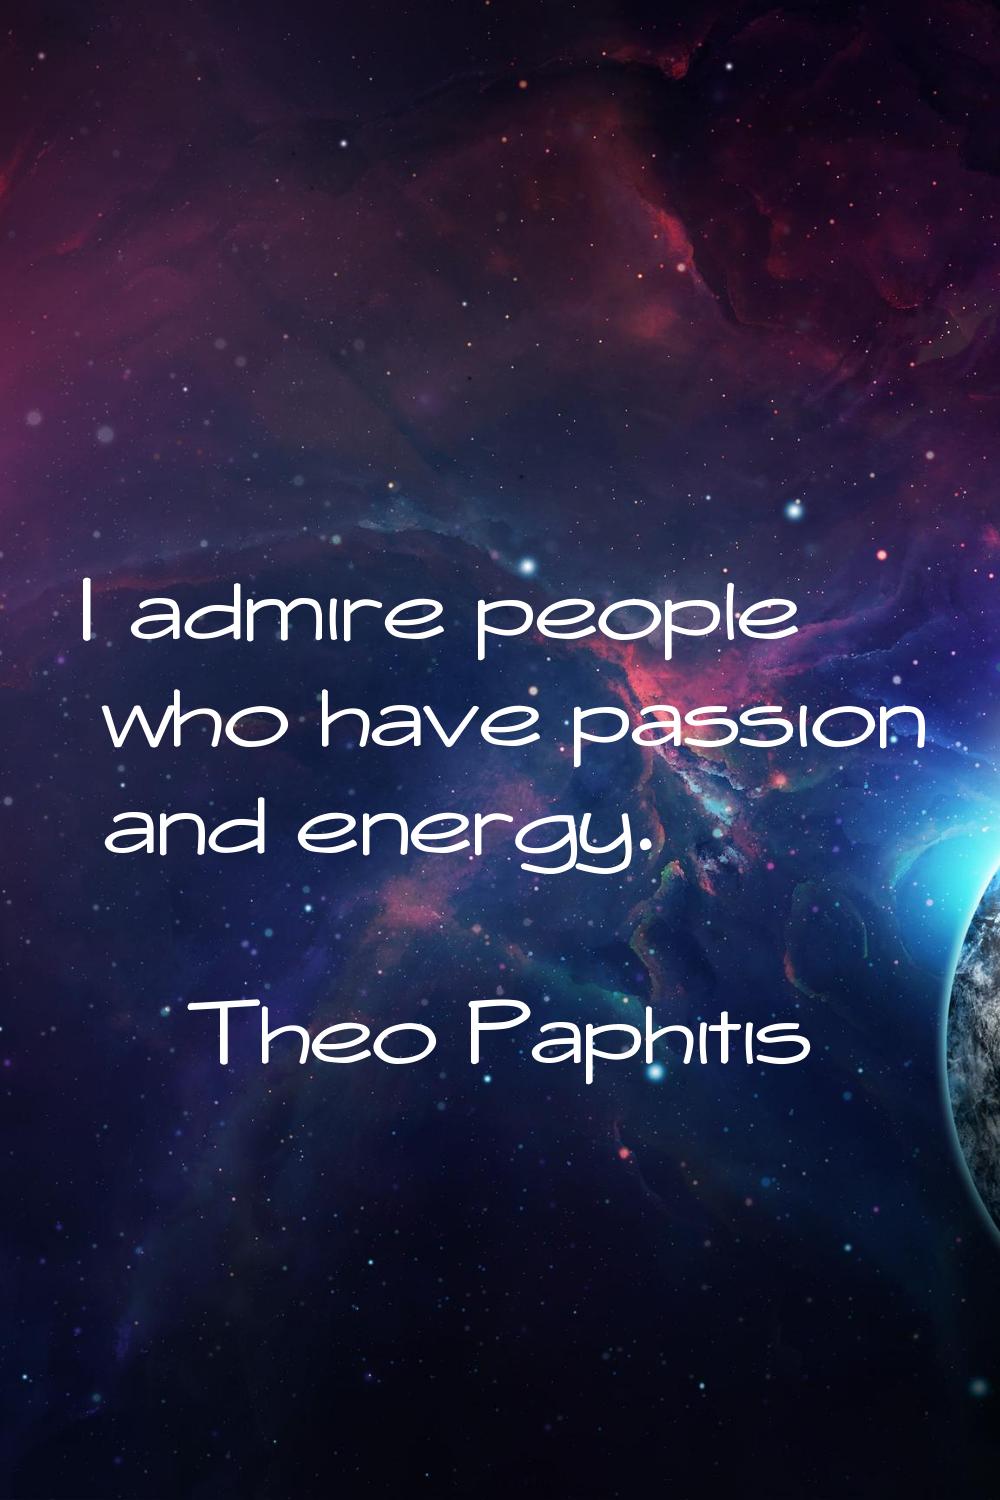 I admire people who have passion and energy.